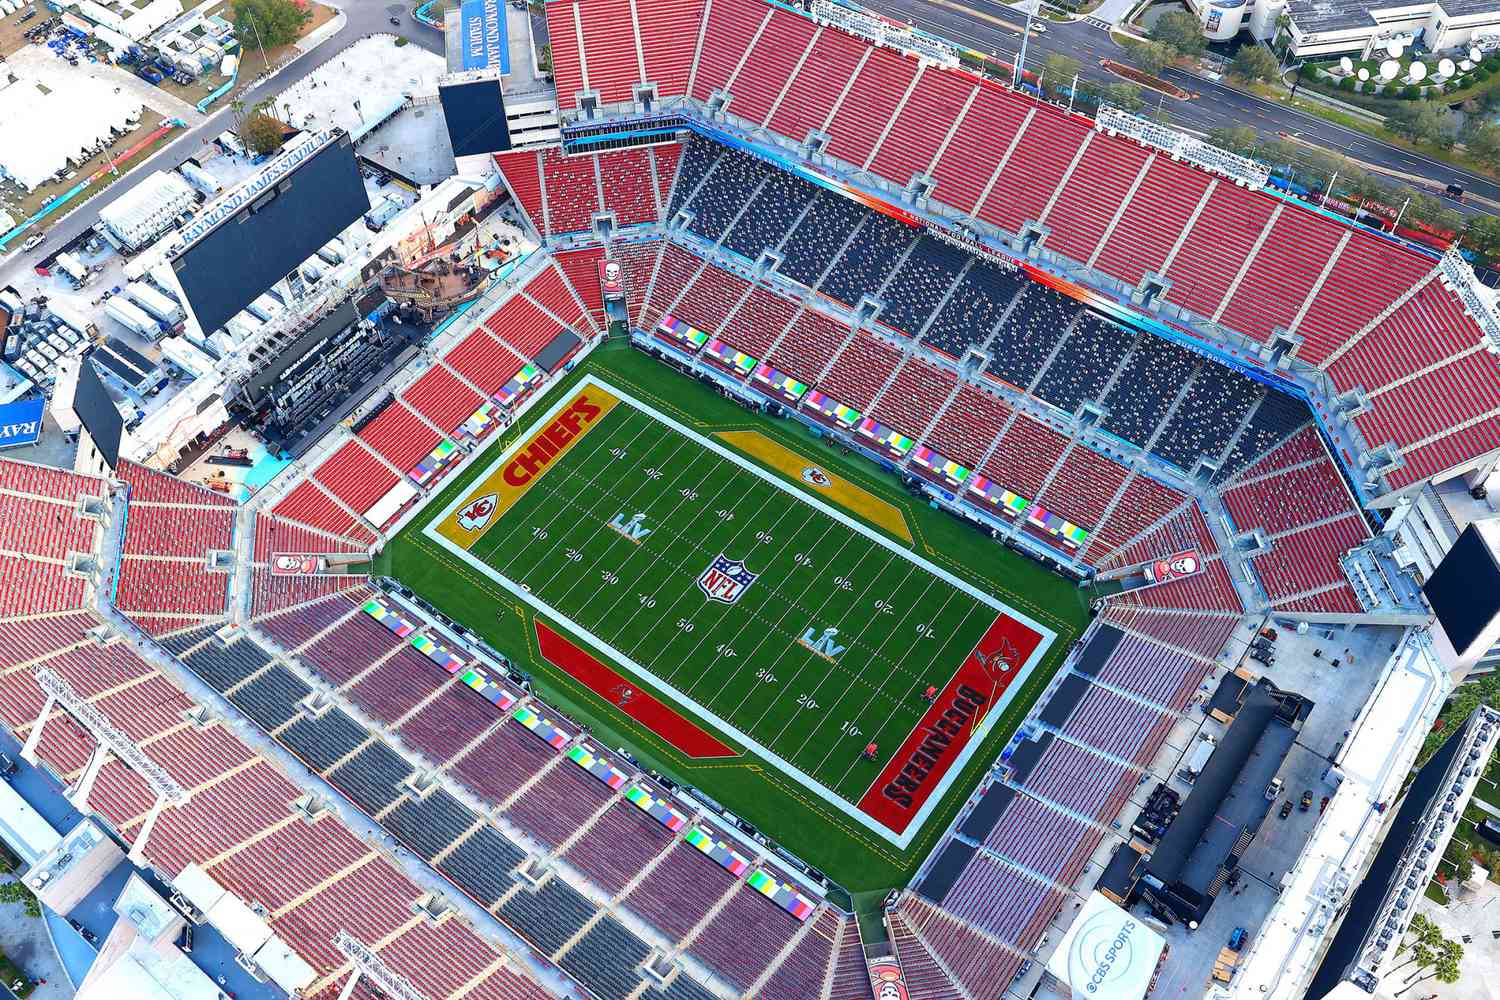 An aerial view of Raymond James Stadium ahead of Super Bowl LV on January 31, 2021 in Tampa, Florida